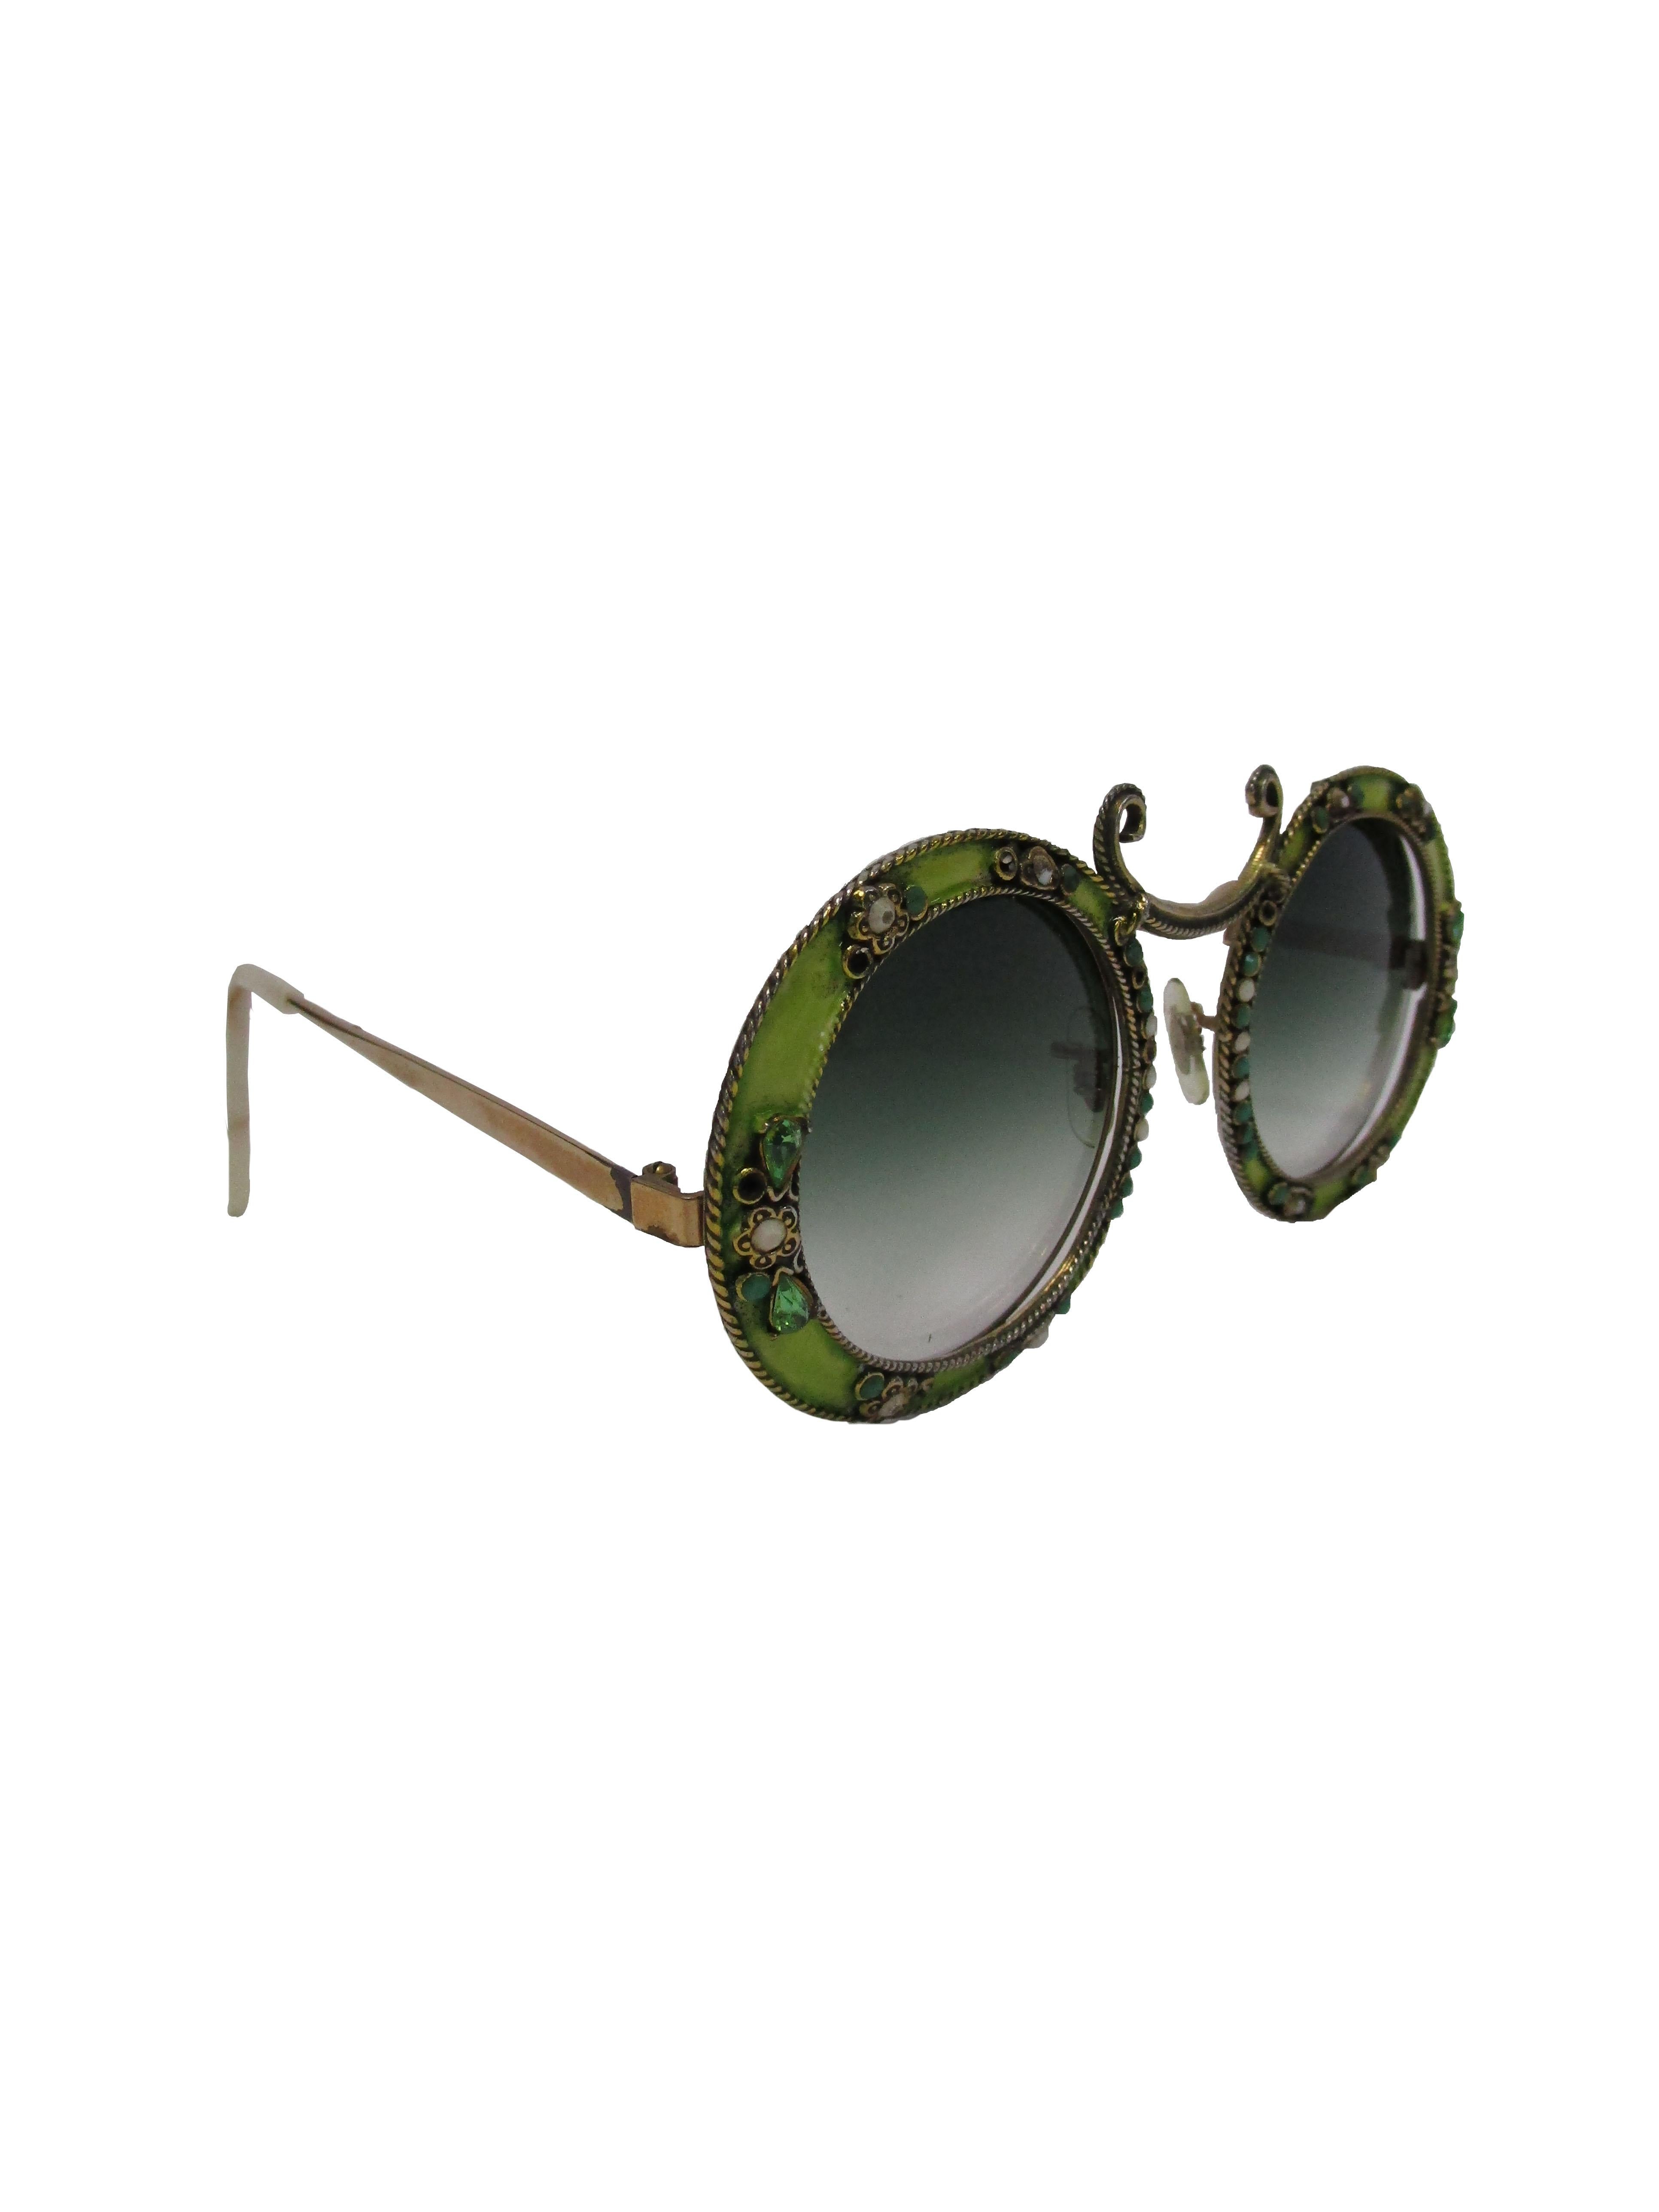 
Lovely, whimsical, and absolutely charming! These bright and breezy sunglasses feature a green enamel over a 1/10 12 KGF frame. The frame is encrusted with round and pear shaped rhinestones in grassy greens and white, sitting between floral